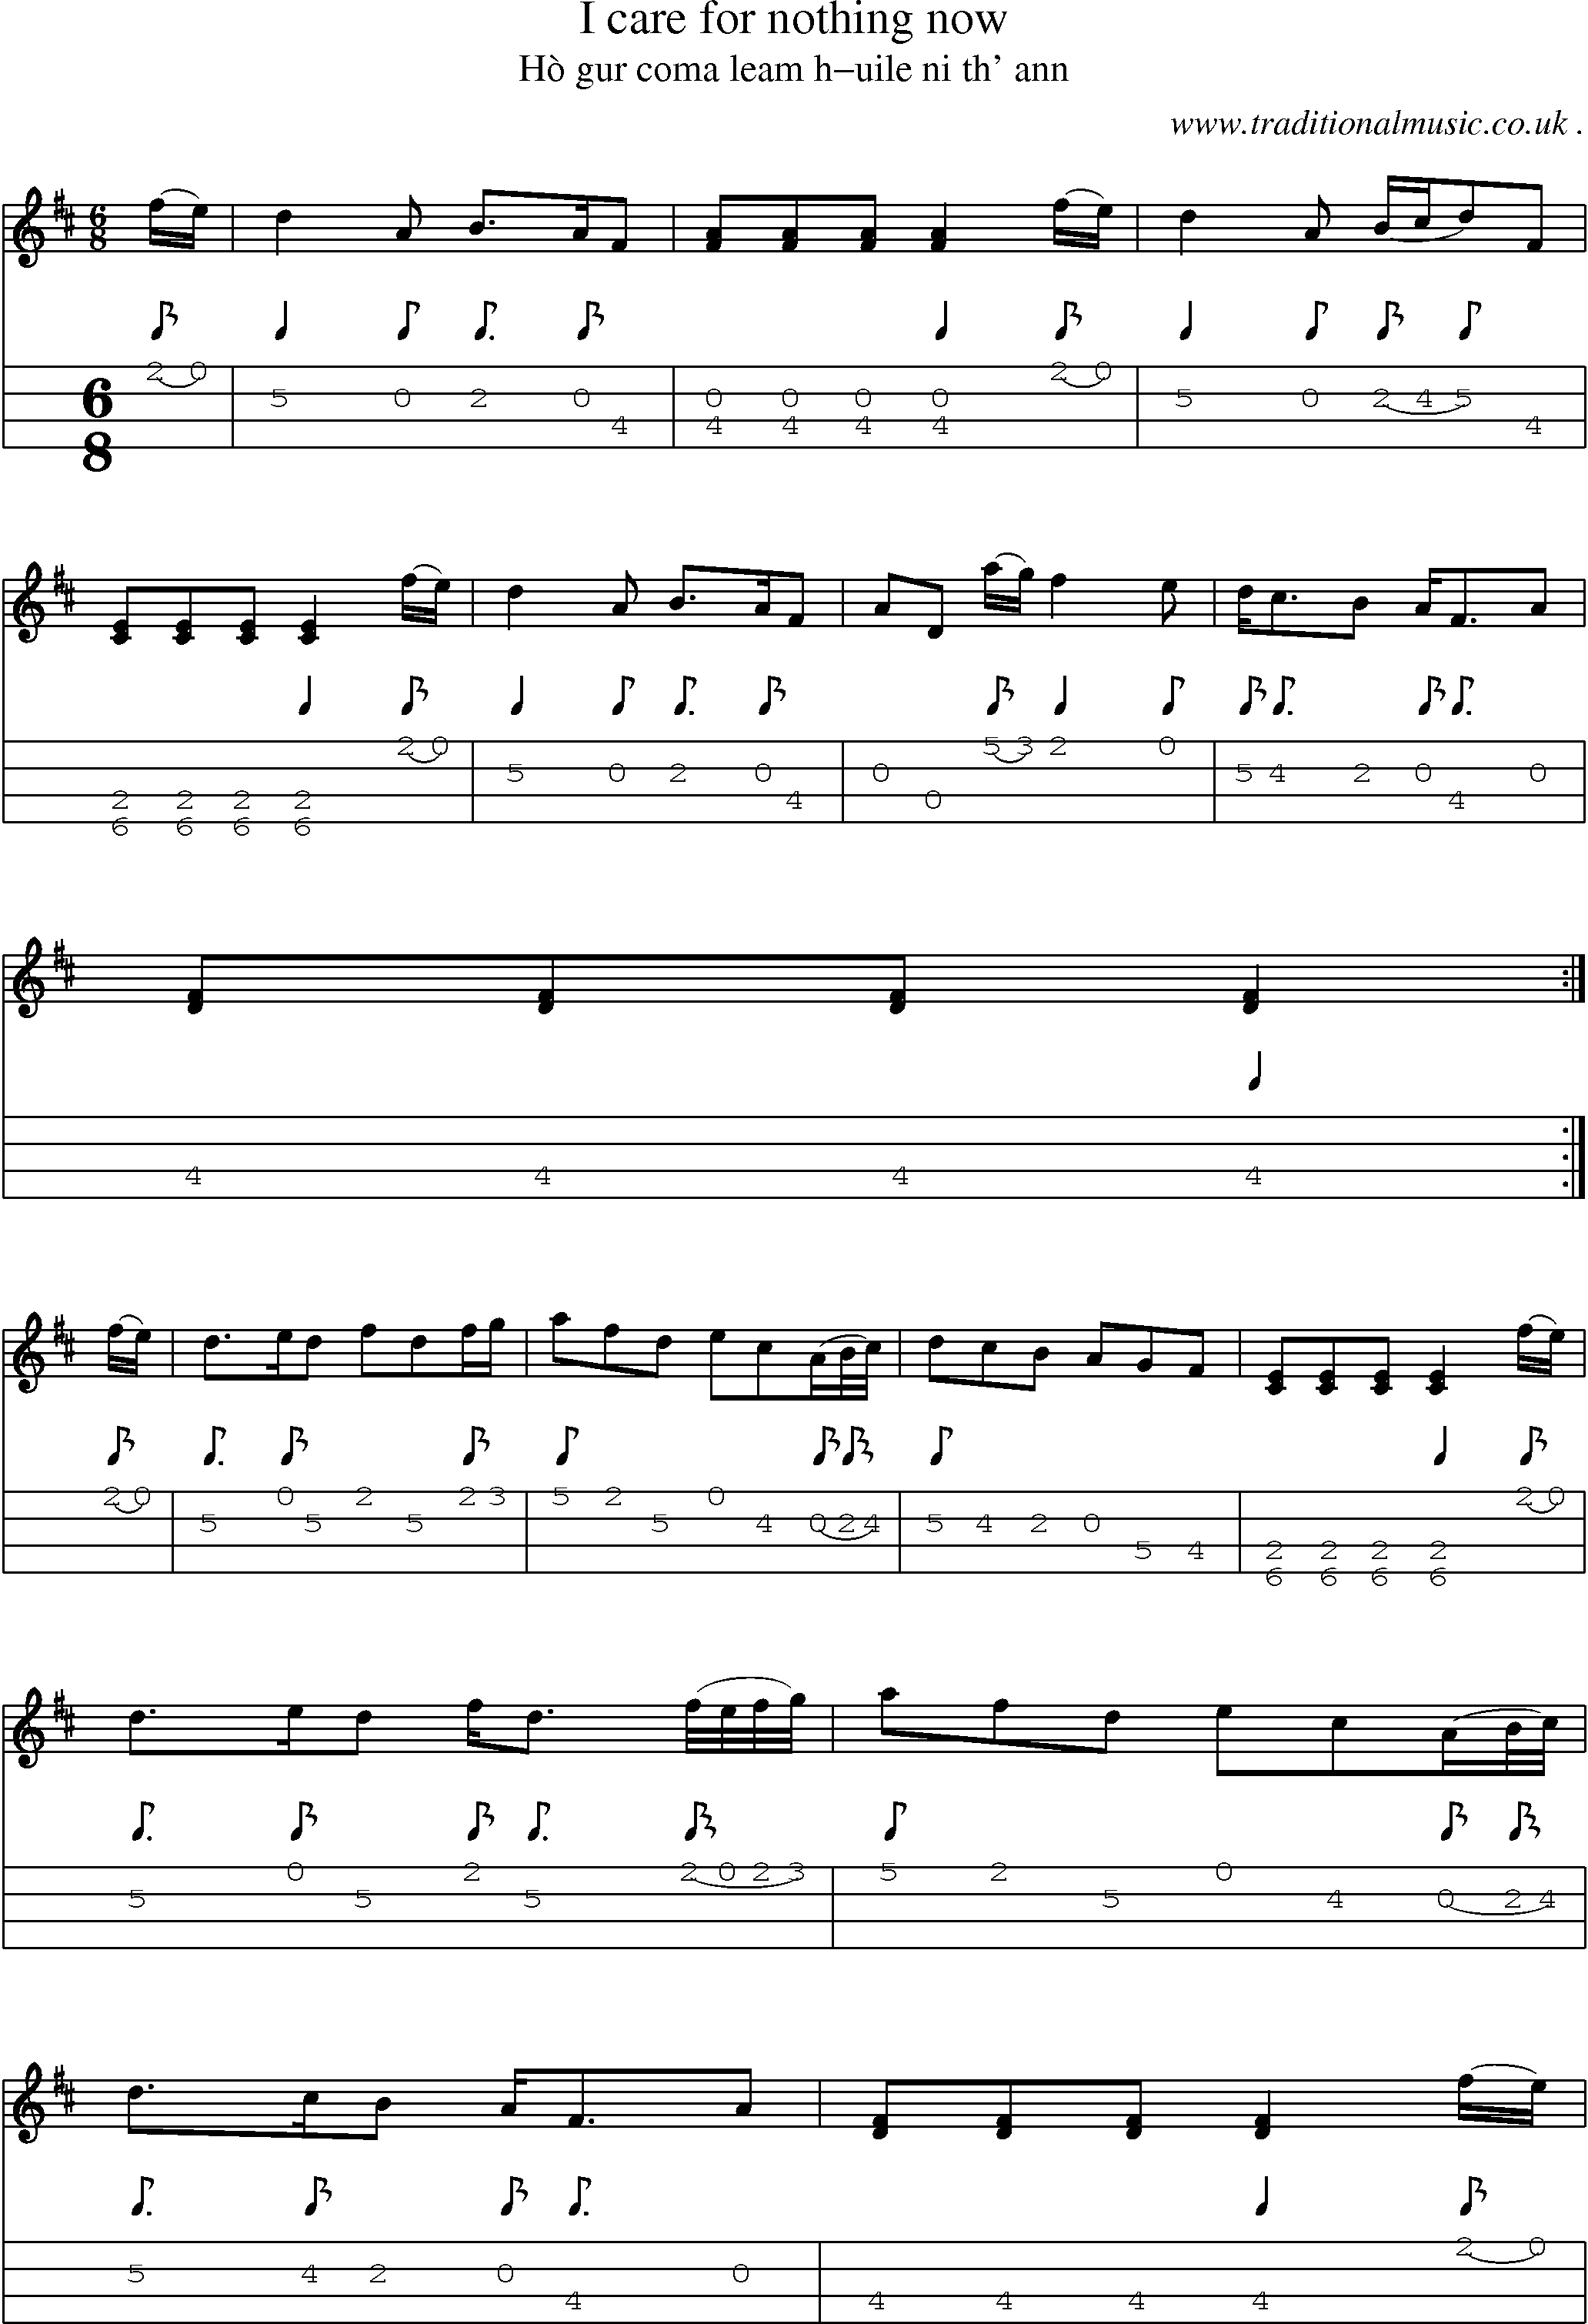 Sheet-music  score, Chords and Mandolin Tabs for I Care For Nothing Now